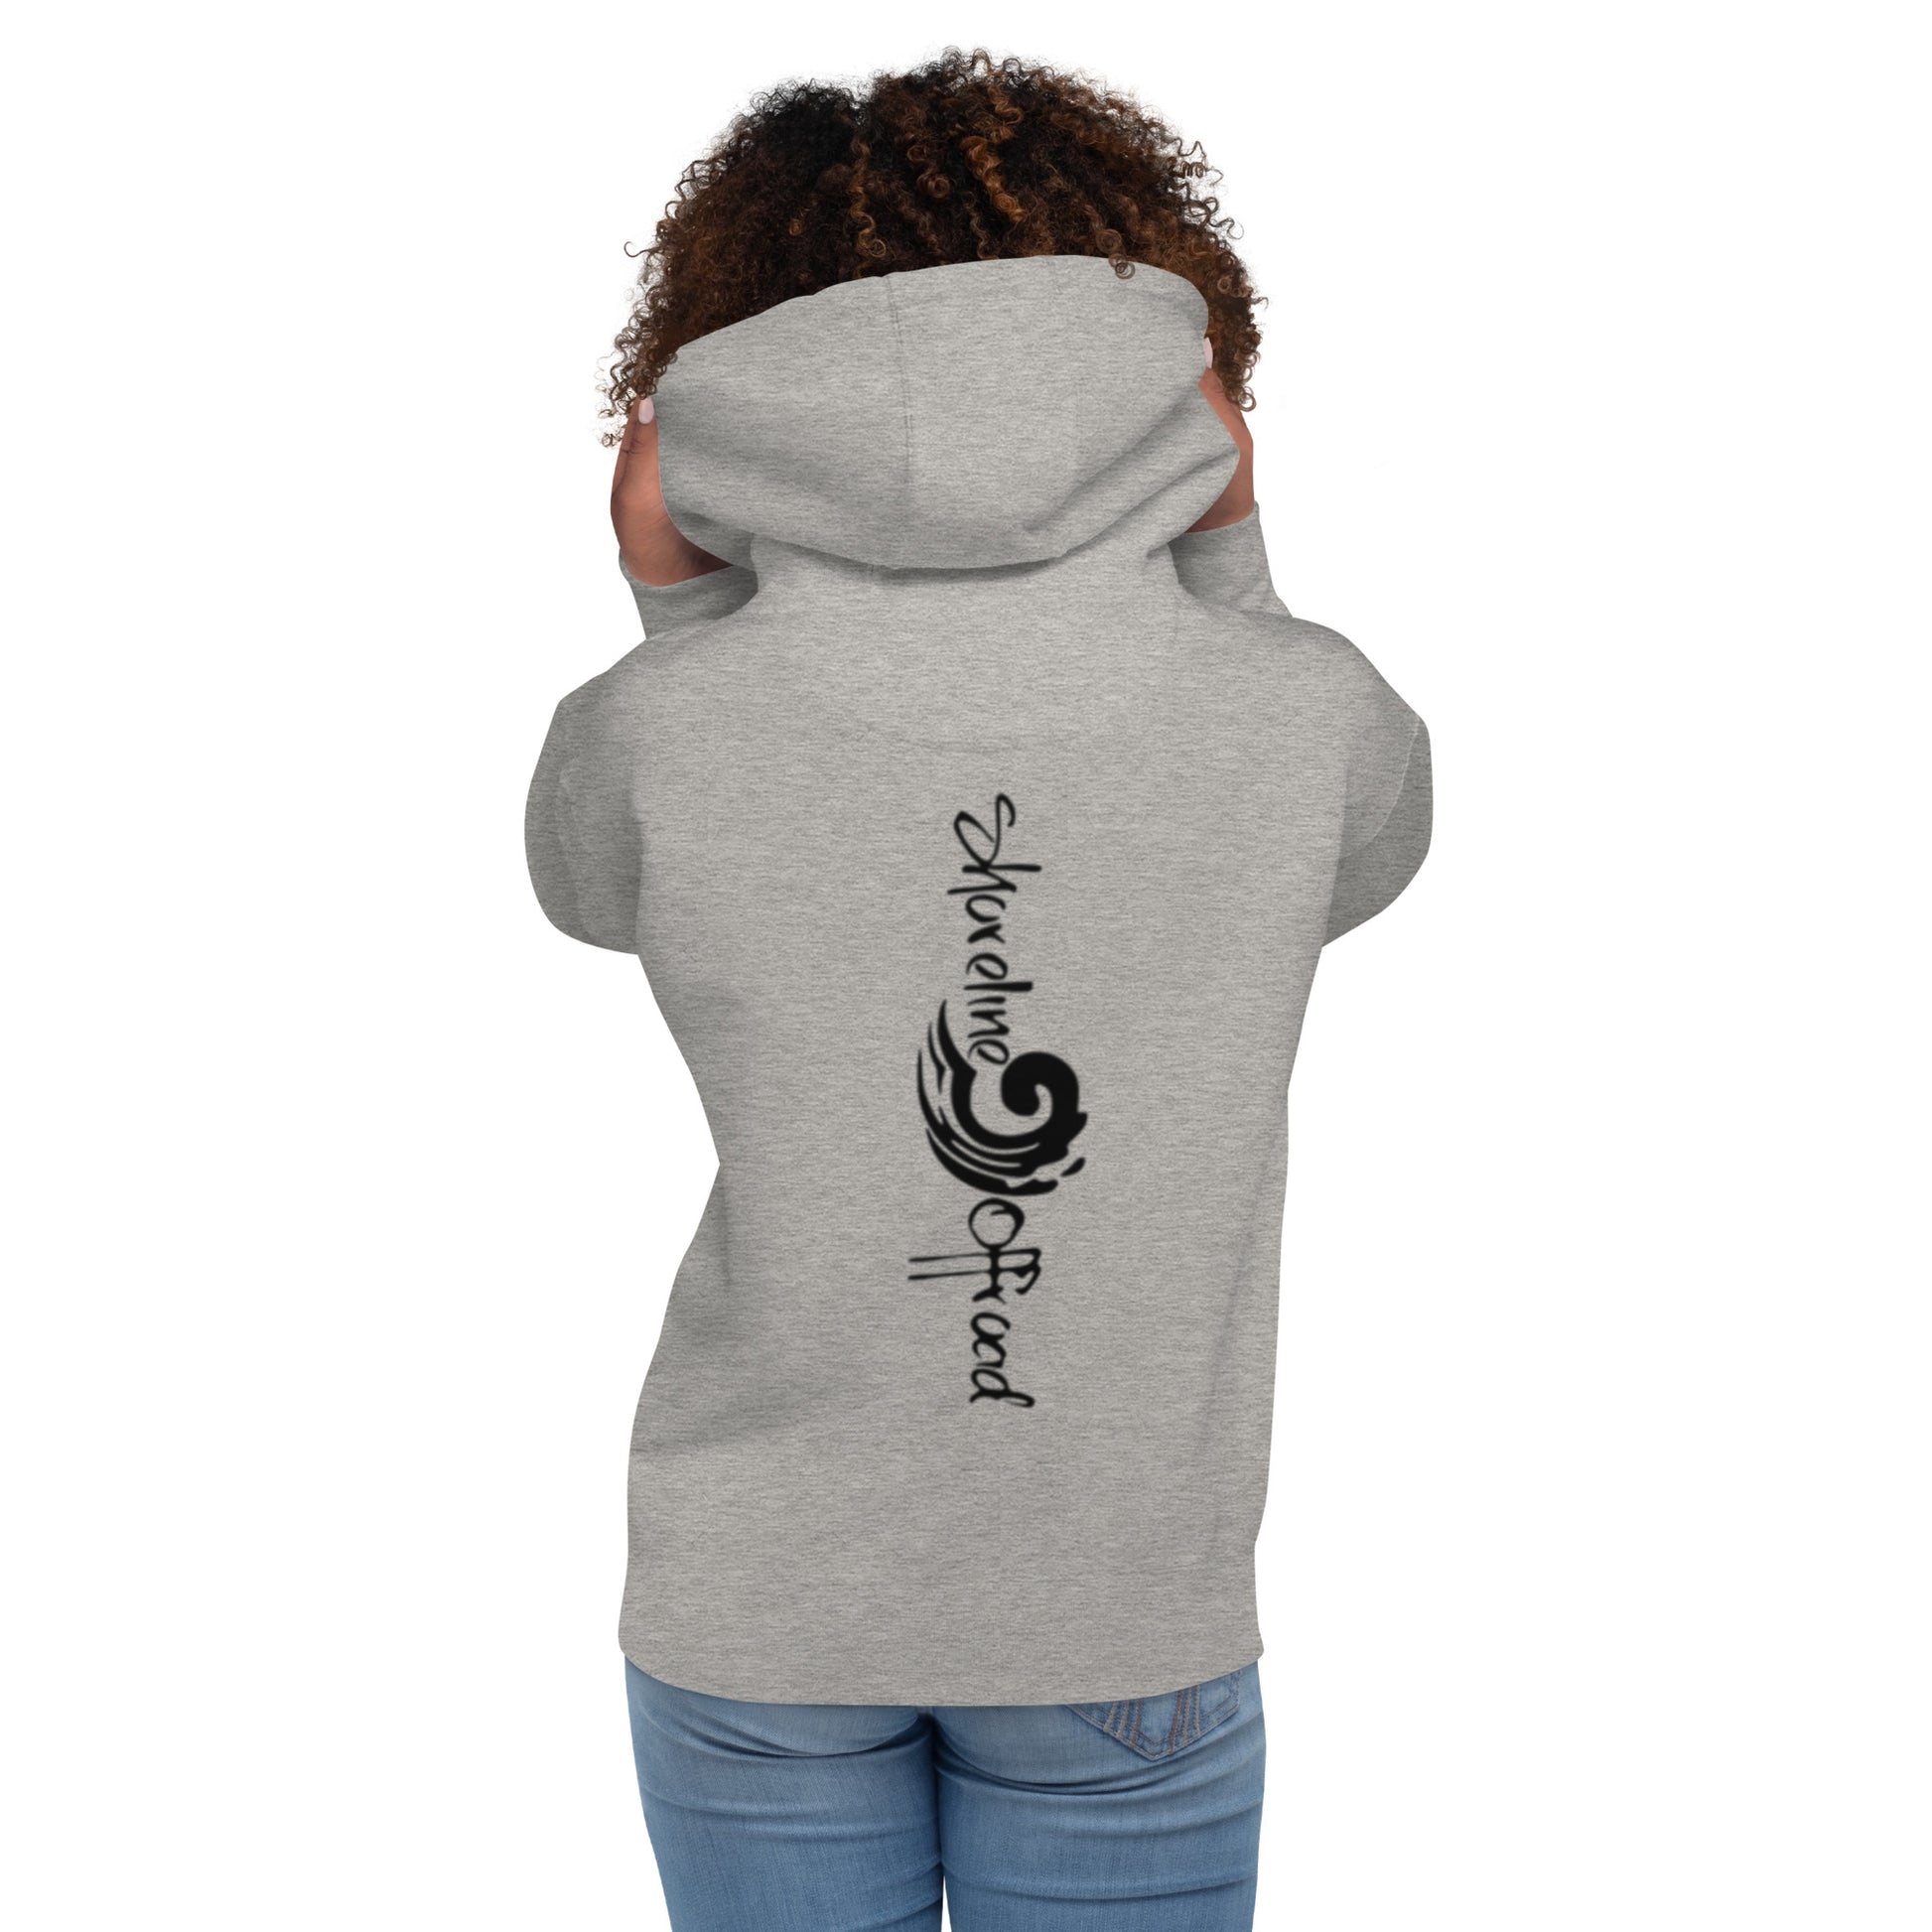 a woman wearing a grey hoodie with a black design on it